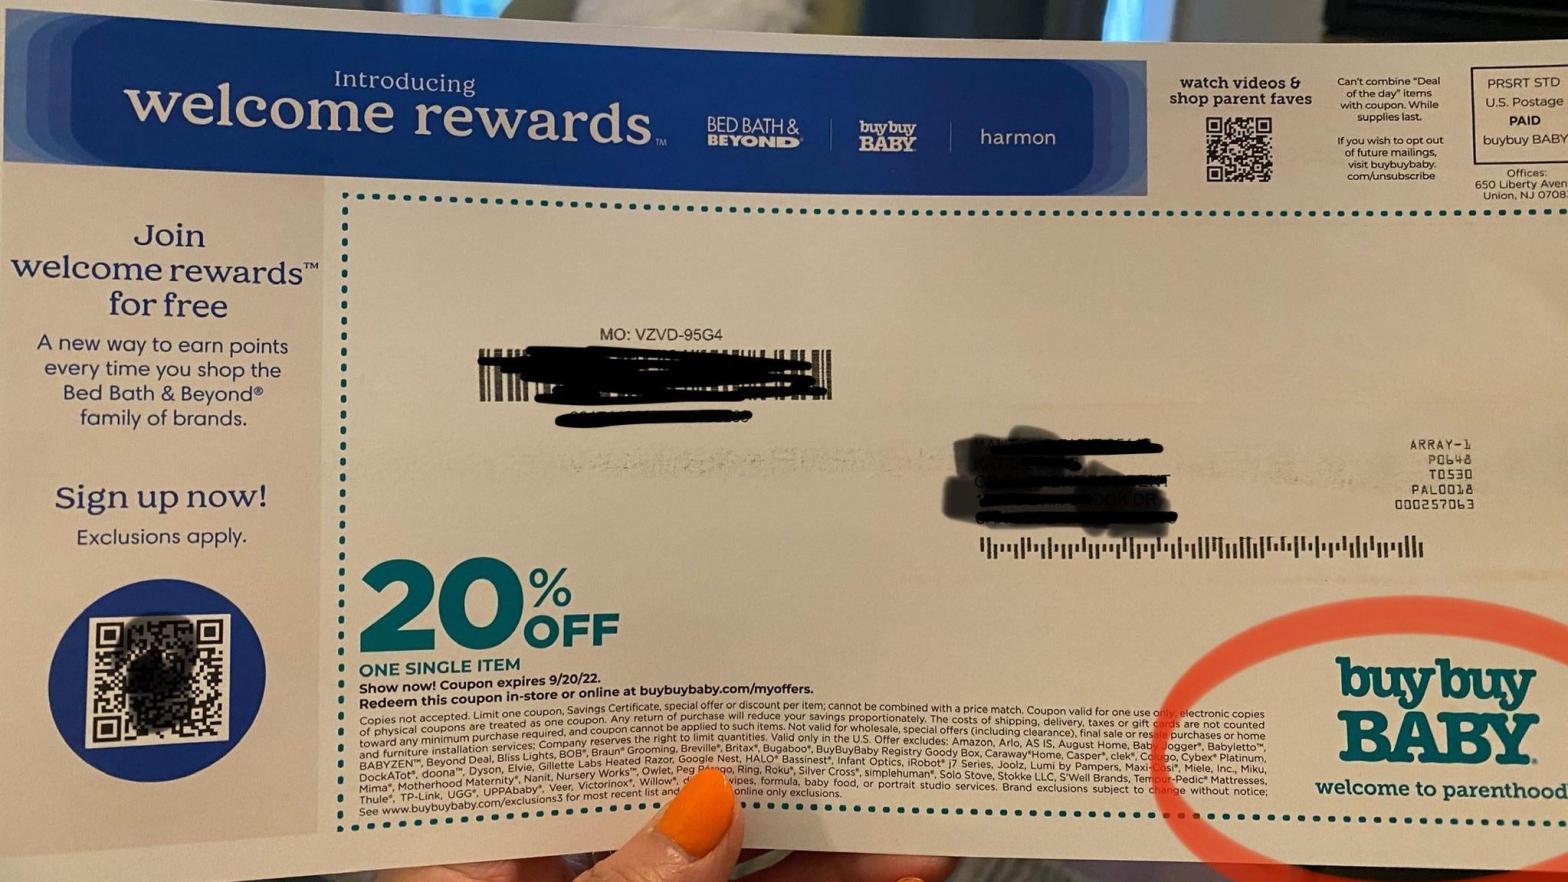 The coupon Stephanie Lucas received in the mail she said was addressed to her daughter, even though she isn't pregnant. (Photo: Stephanie Lucas)